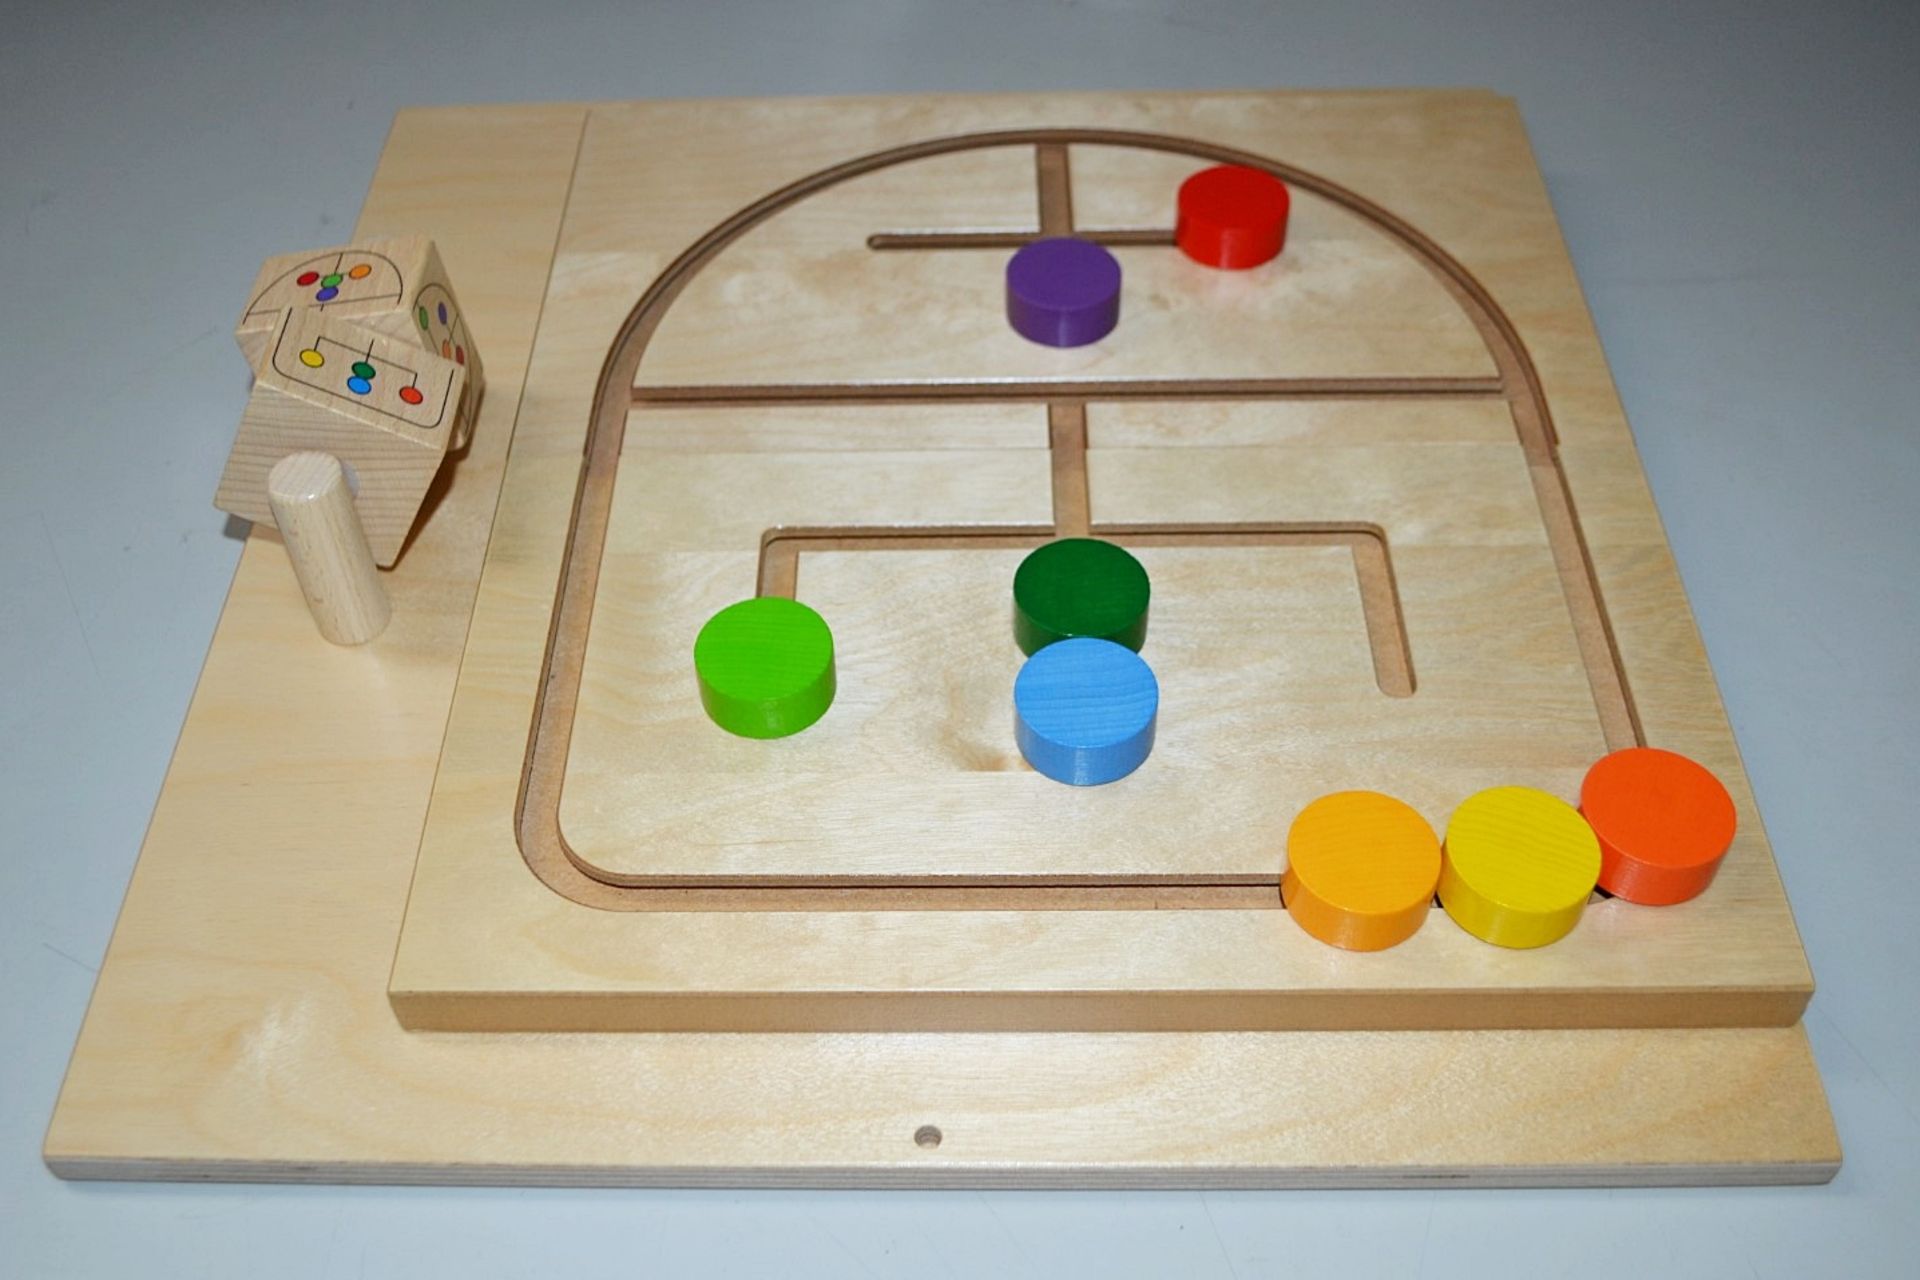 2 x Wall Mounted Wooden Children's Games and Bracket - Ref: CB130 - CL425 - Location:Altrincham WA14